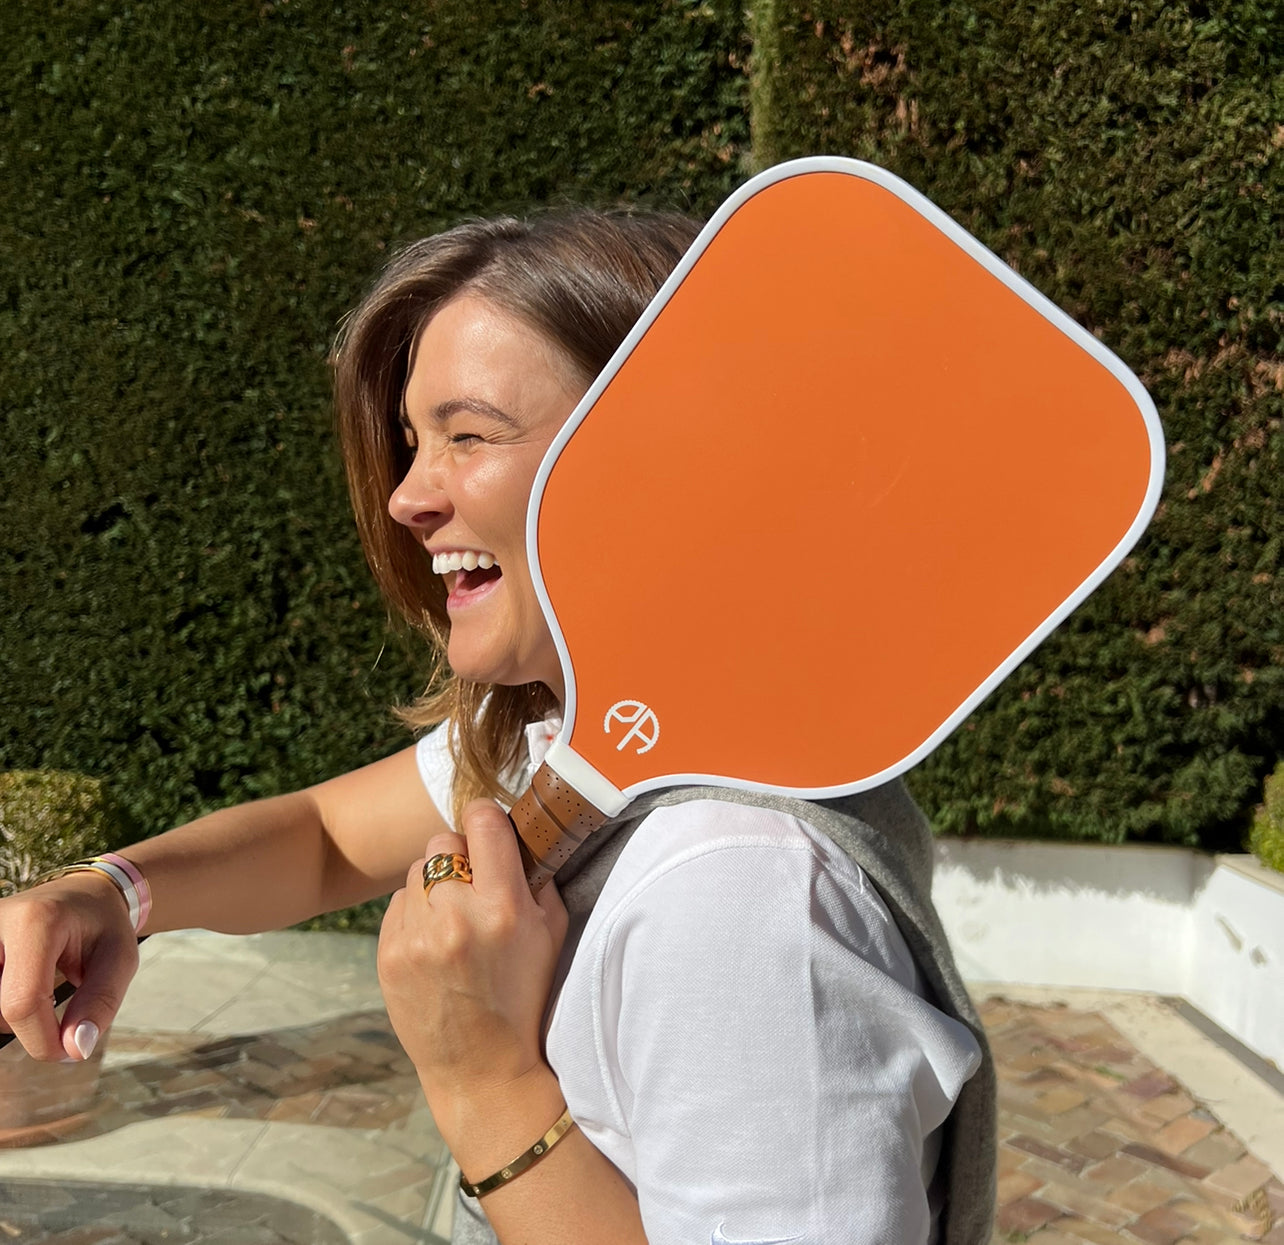 Girl laughing while holding a pickleball paddle.